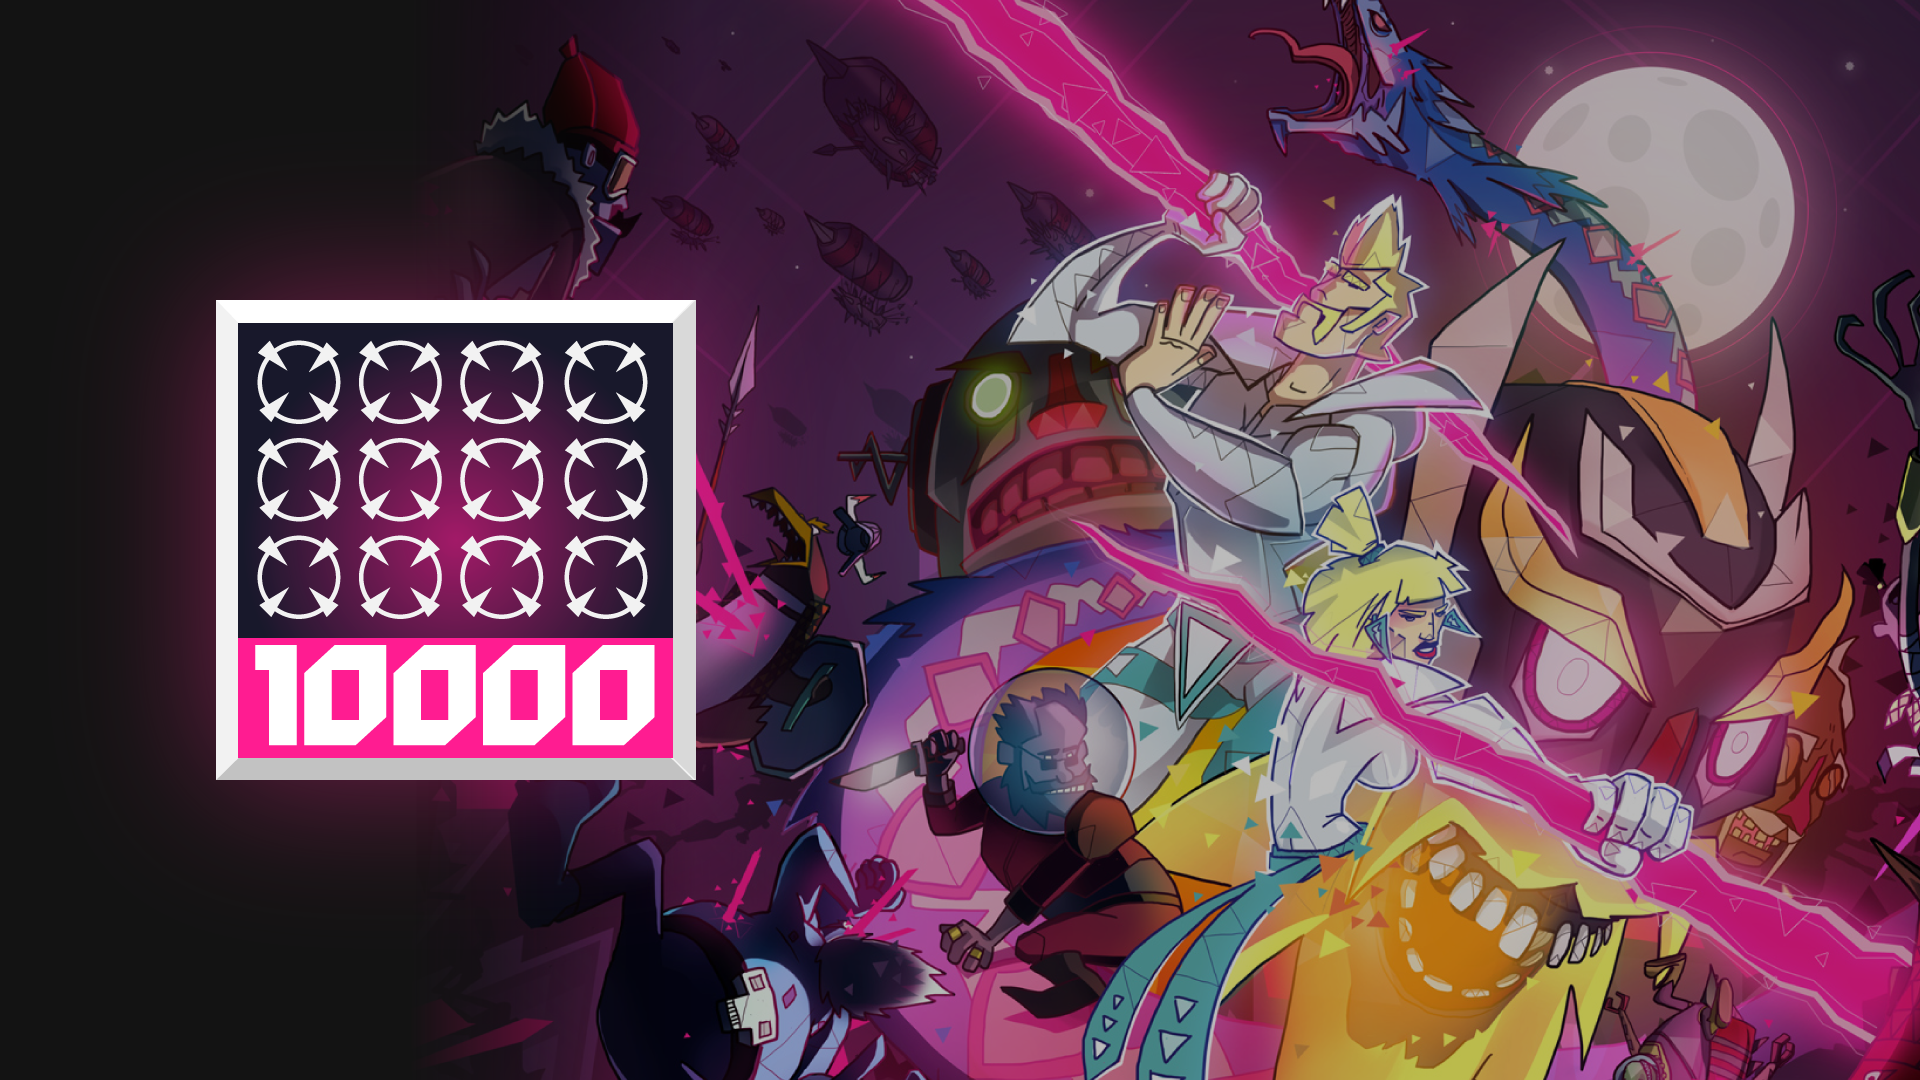 Icon for Killed a 10000 enemies